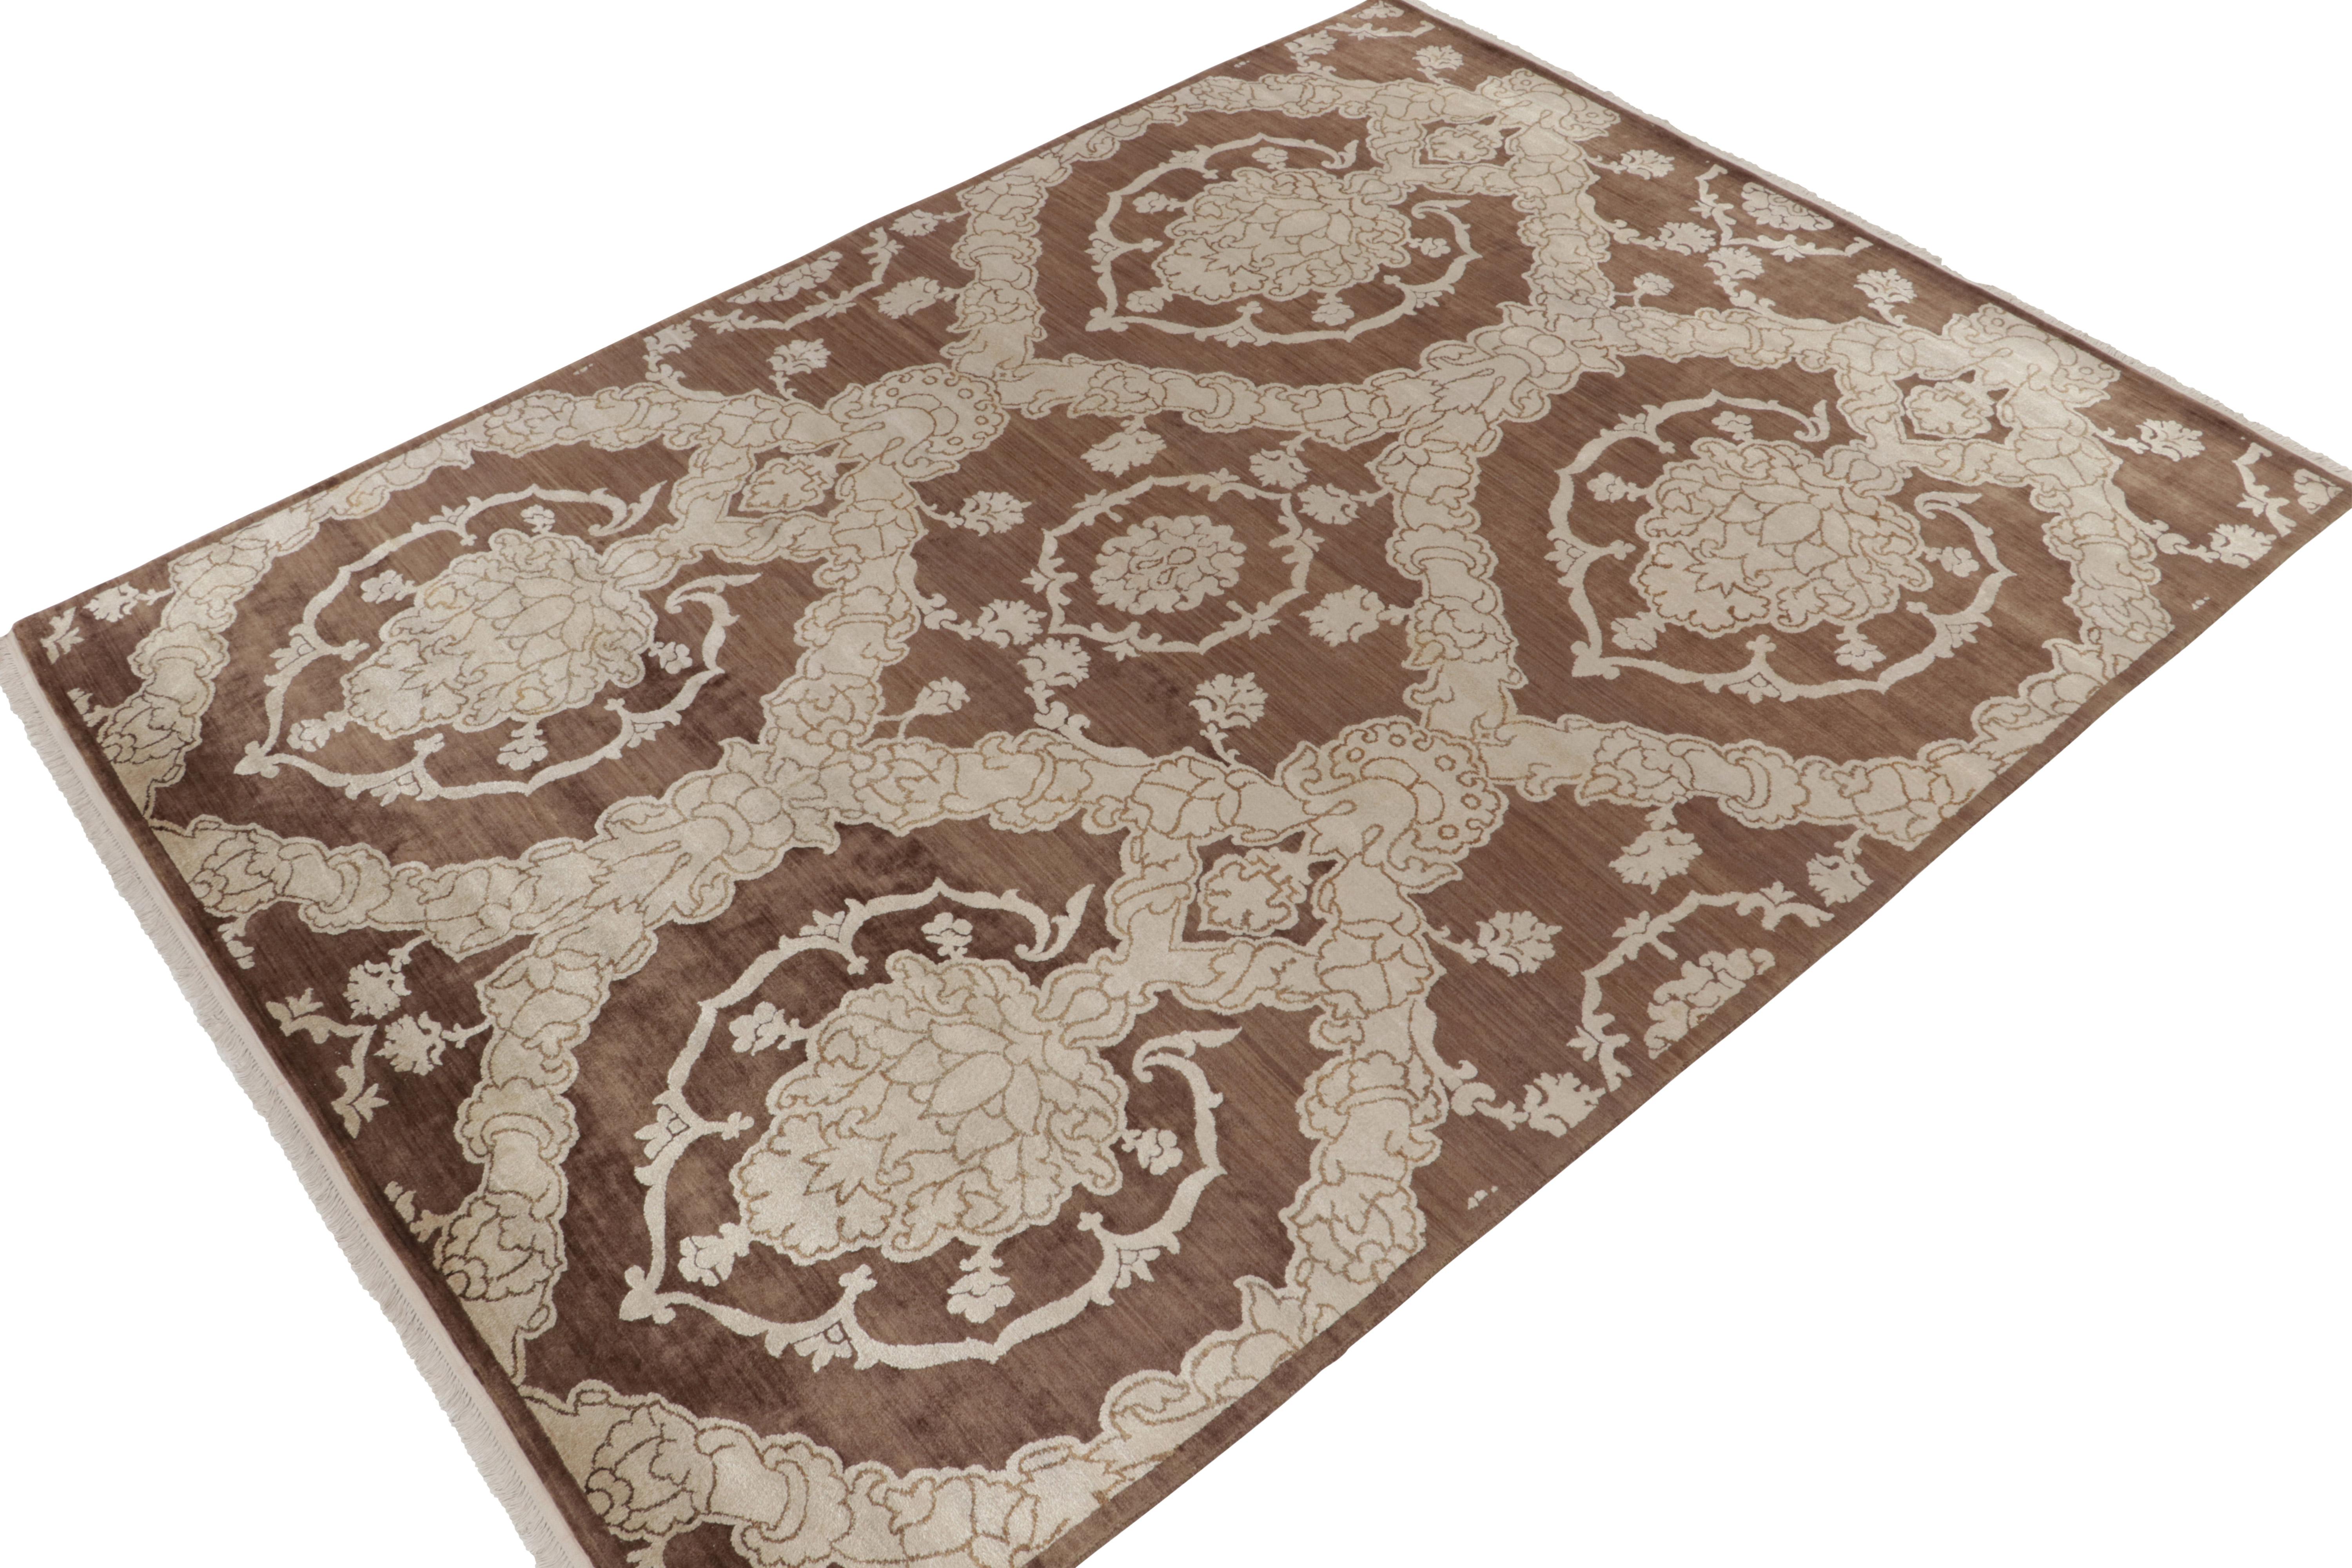 Hand-knotted in luxurious silk, this 9x12 contemporary rug from our Modern Classics collection draws on a delicious European sensibility. 

On the design: A gracious scale hosts a play of medallions and floral trellis patterns connoting